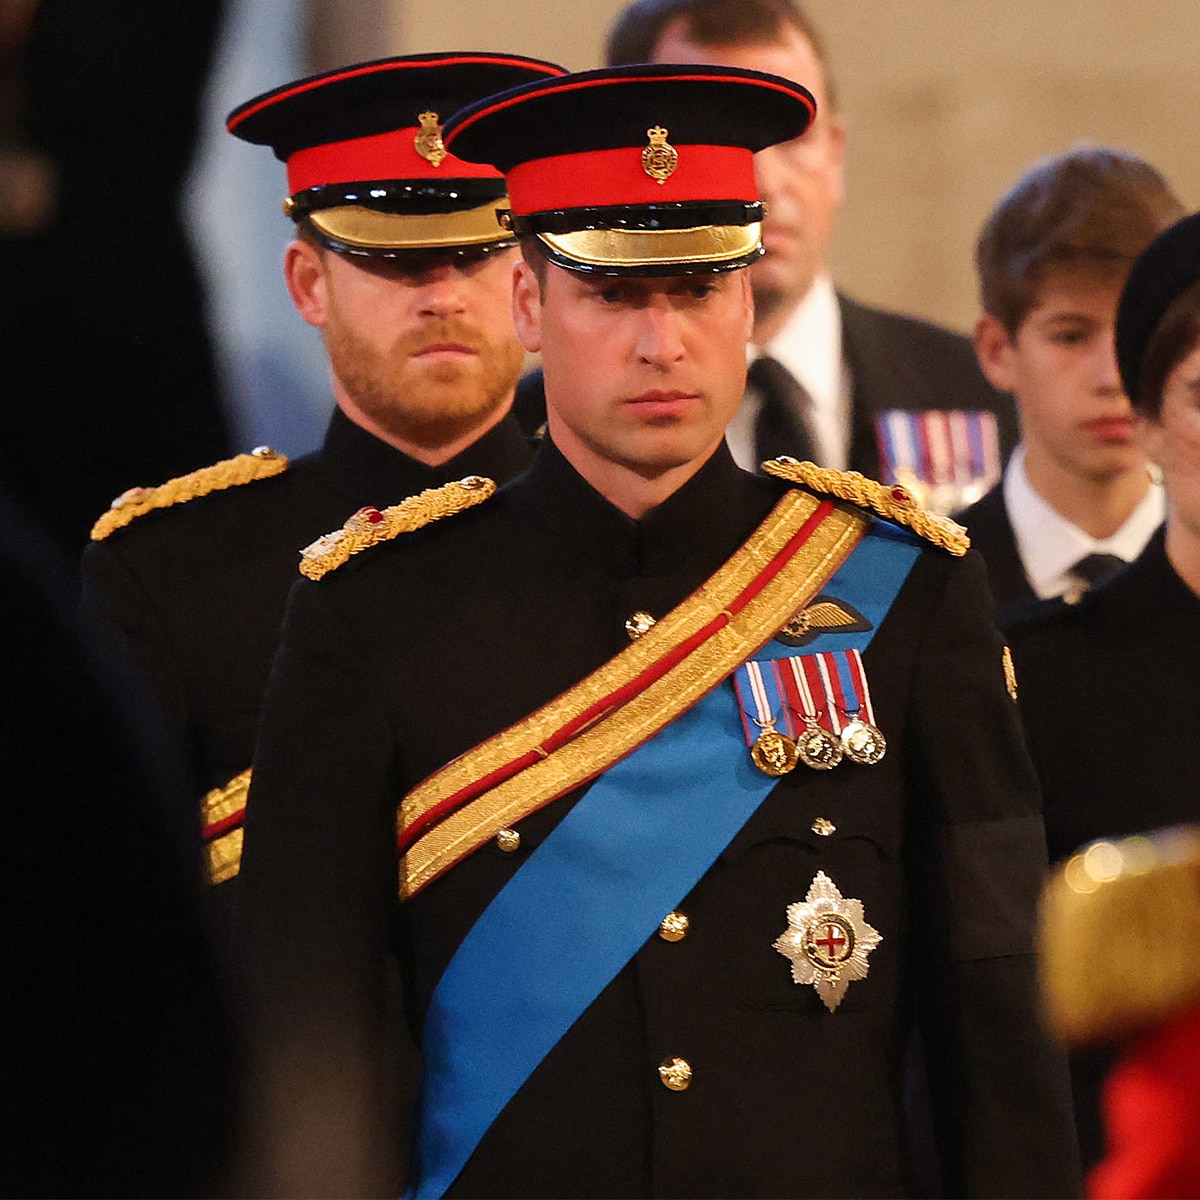 Prince Harry, Prince William And More Of Queen Elizabeth's ...